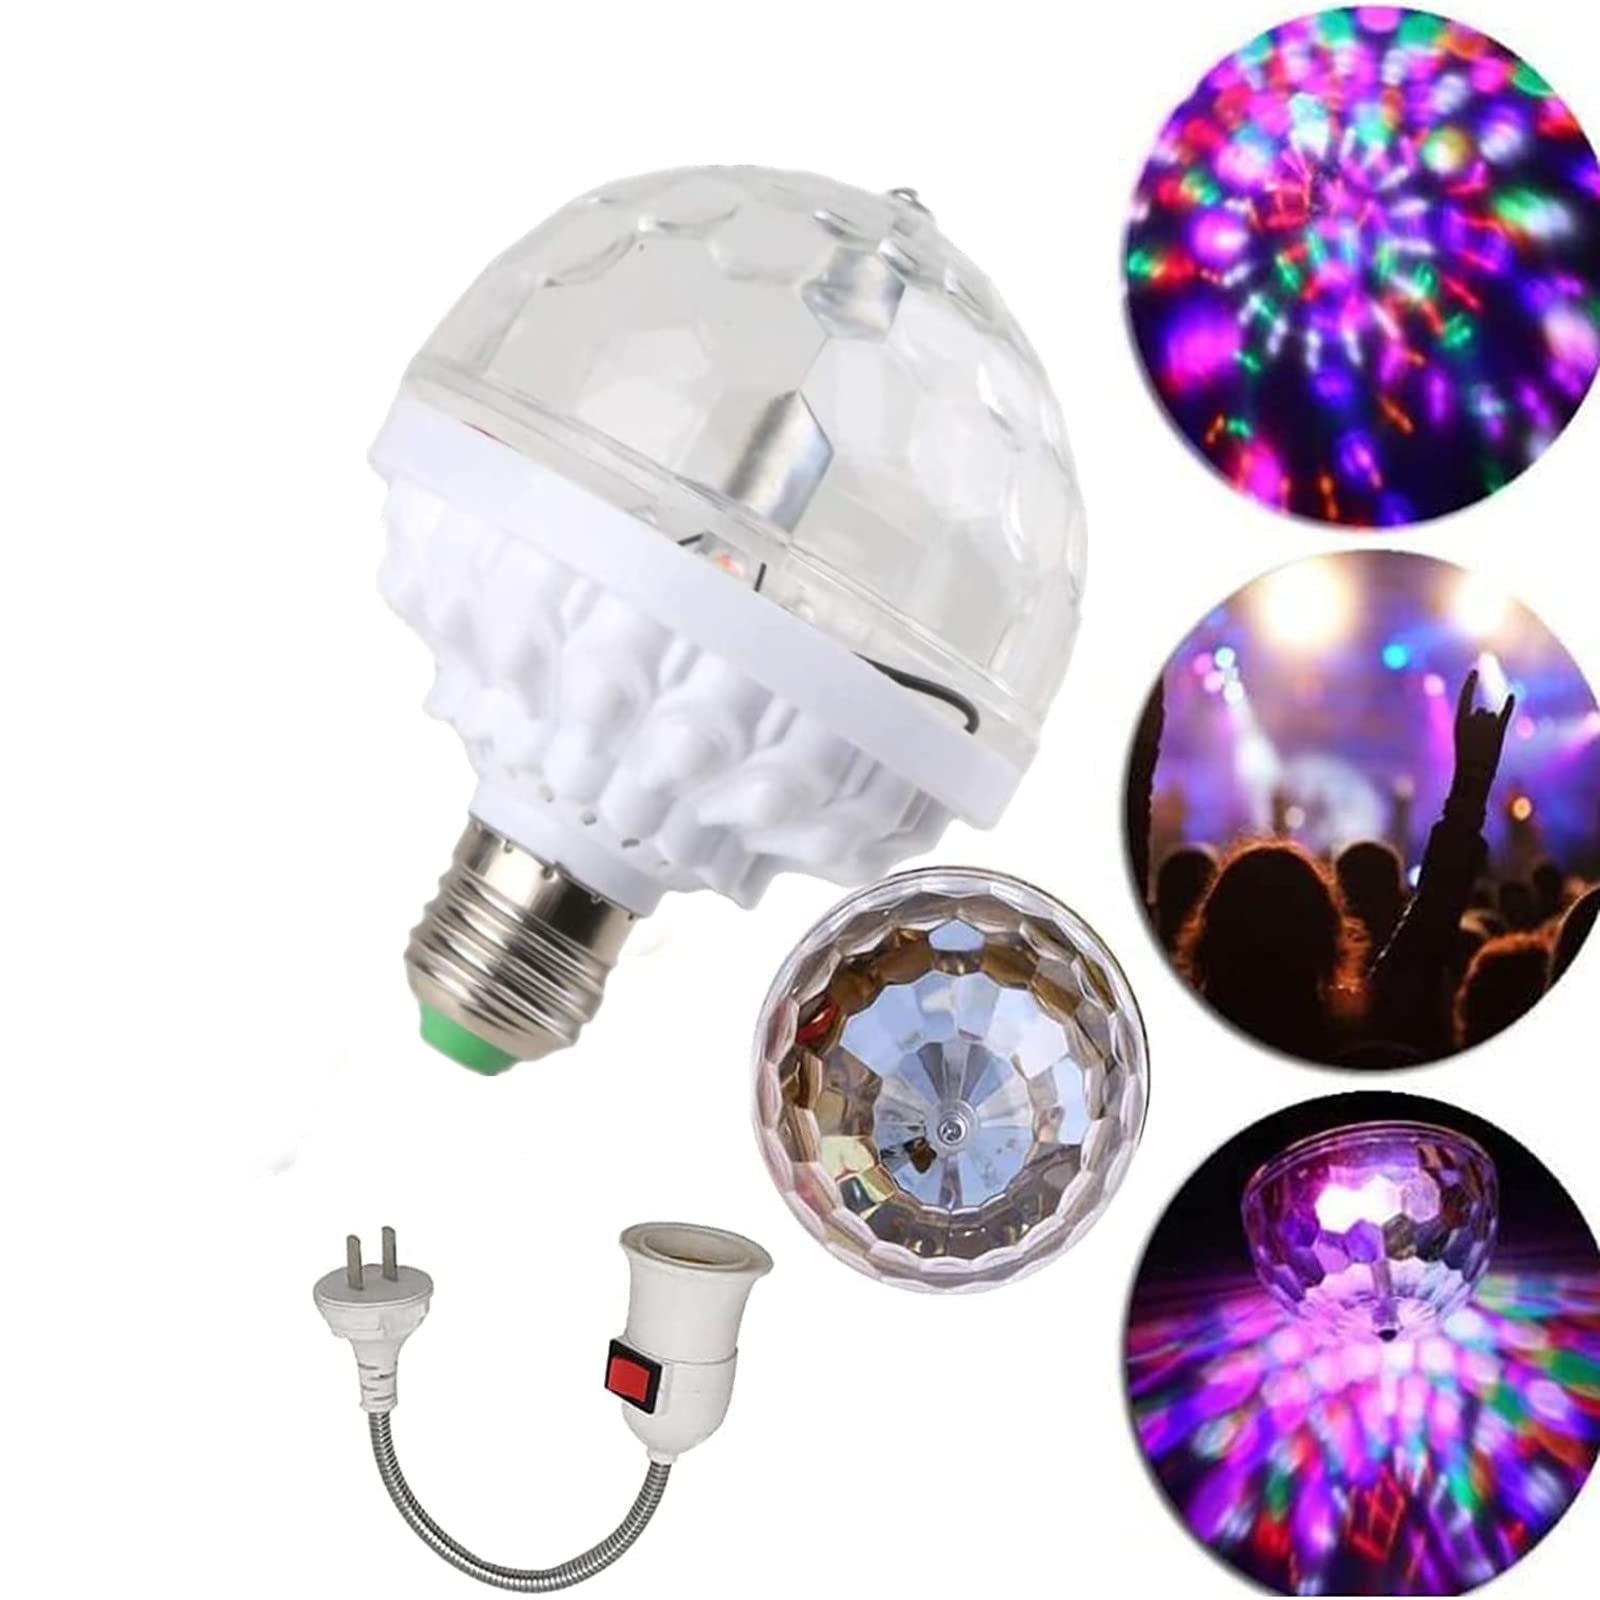 🔥(50% OFF NOW) Colorful Rotating Magic Ball Light–BUY 2 GET 1